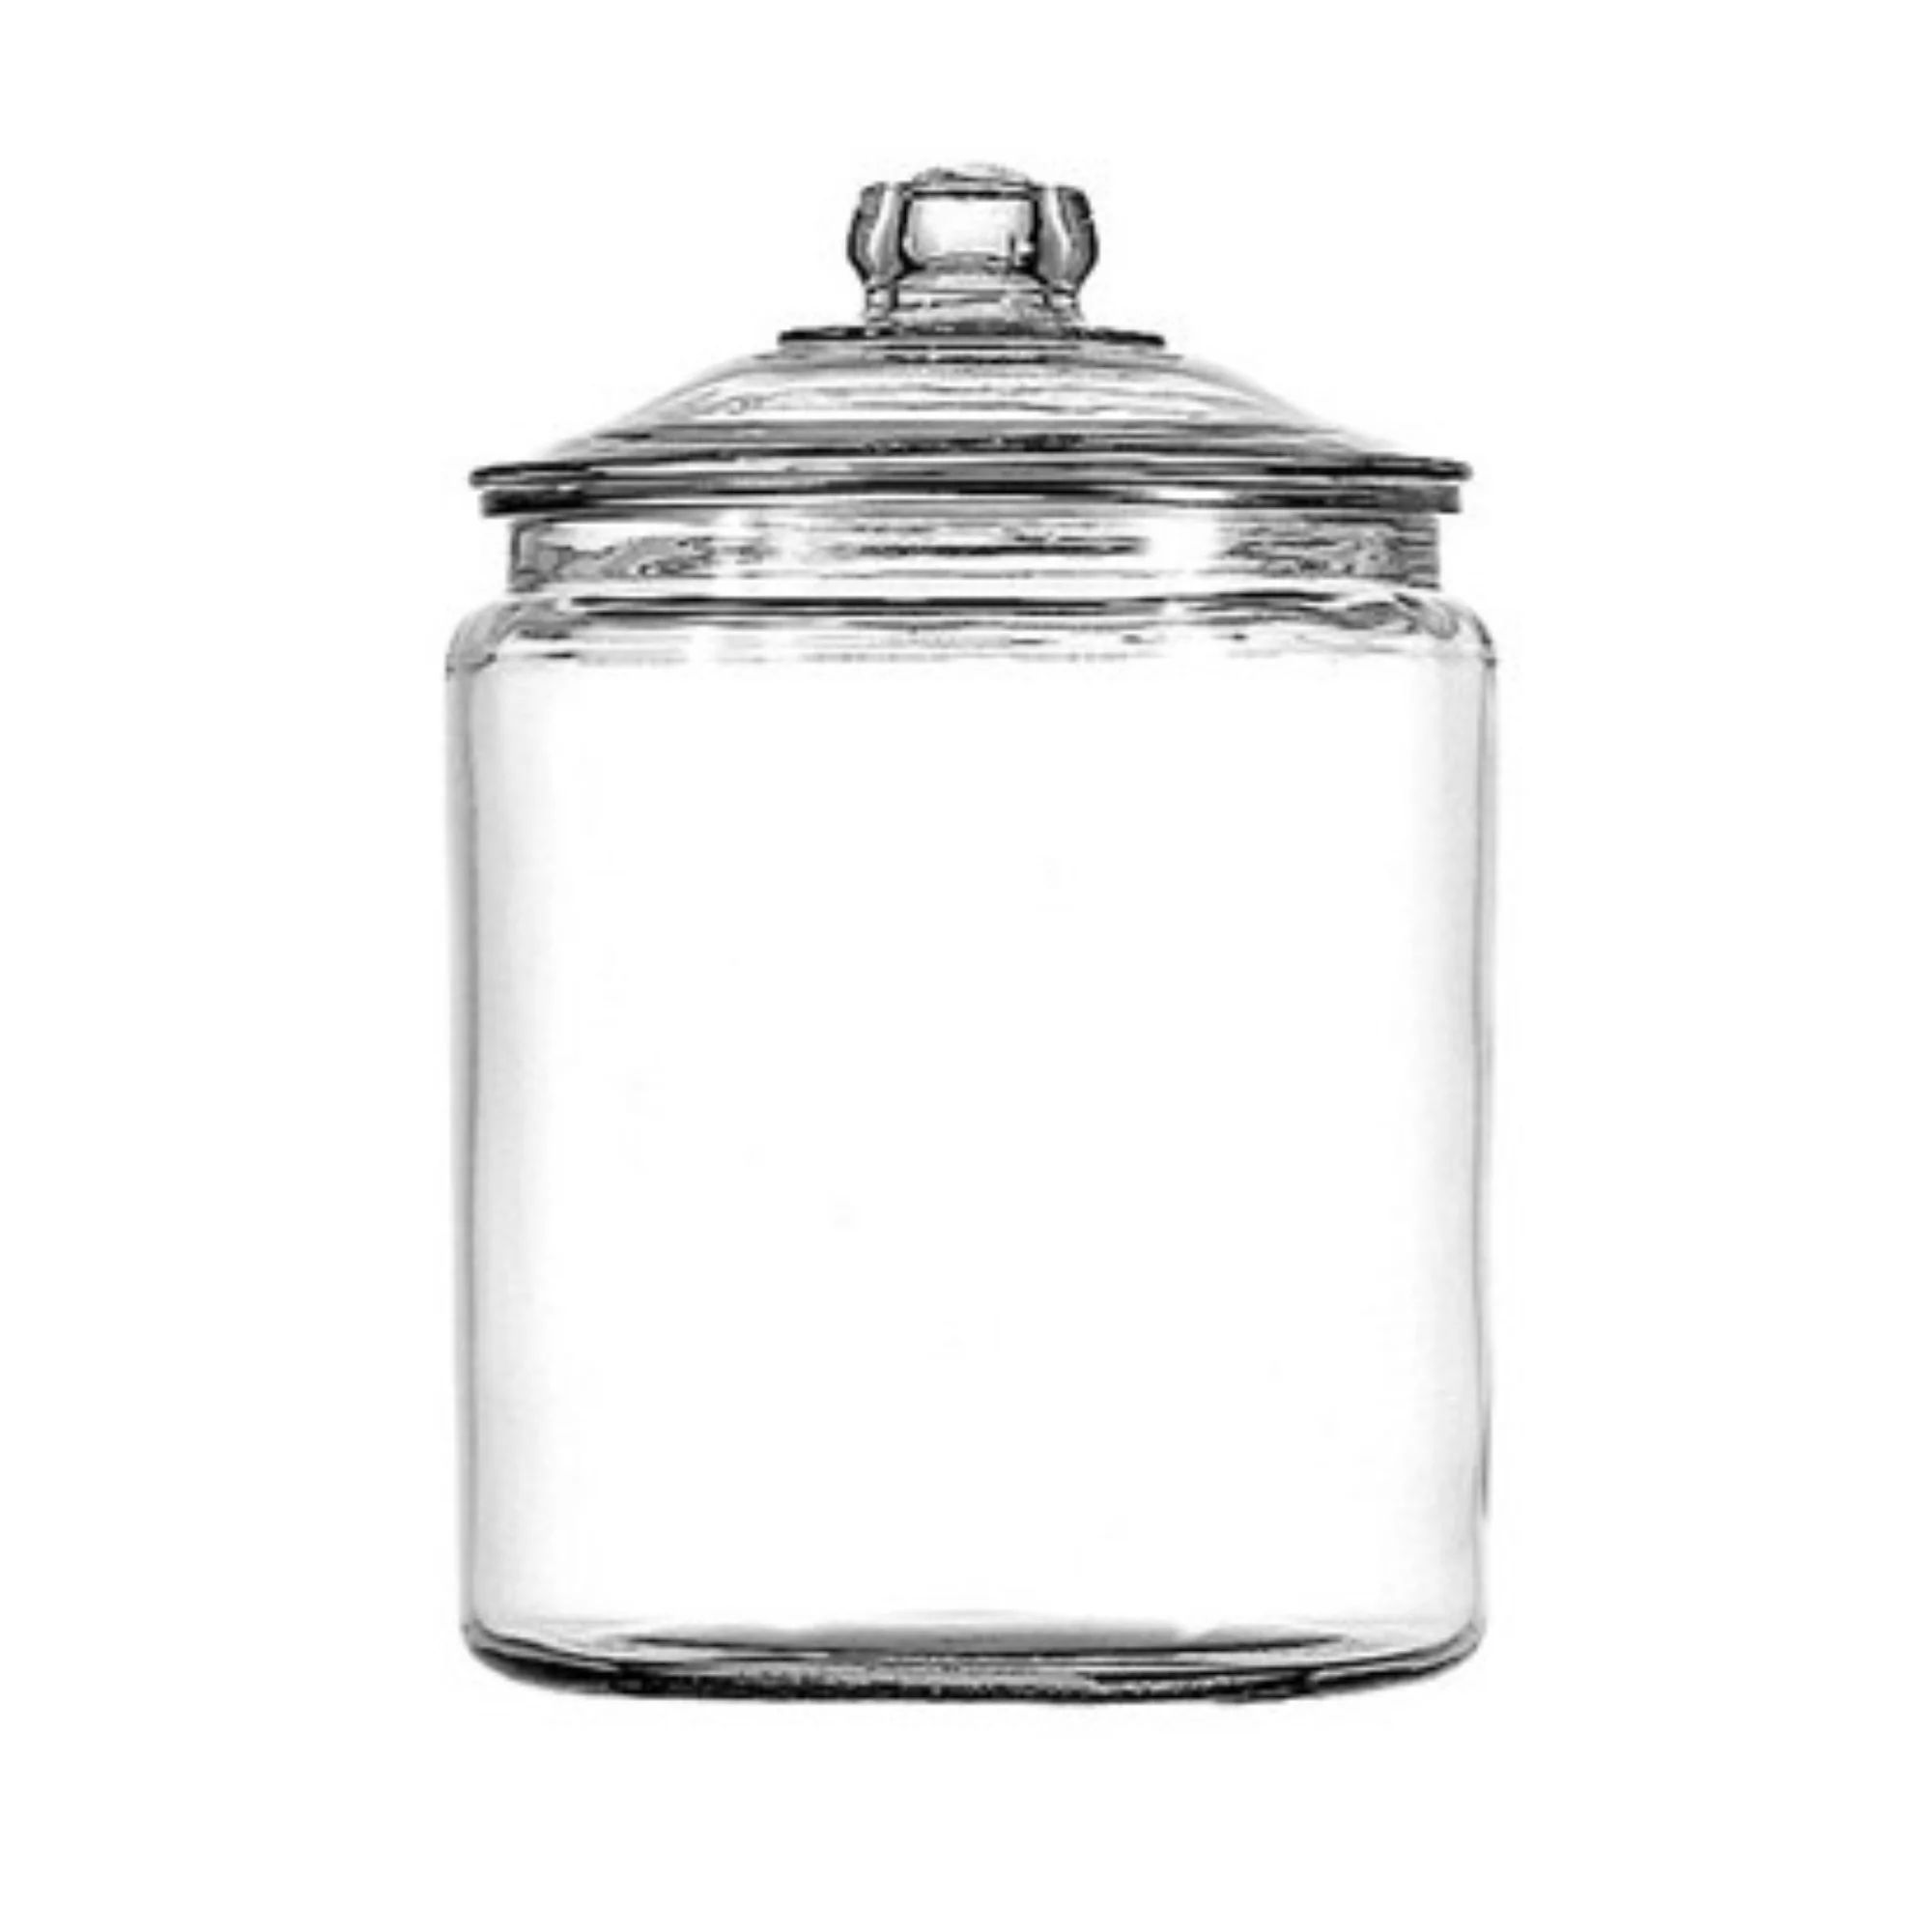 Anchor Hocking Heritage Hill Glass Jar with Lid, 1/2 Gallon | Walmart (US)